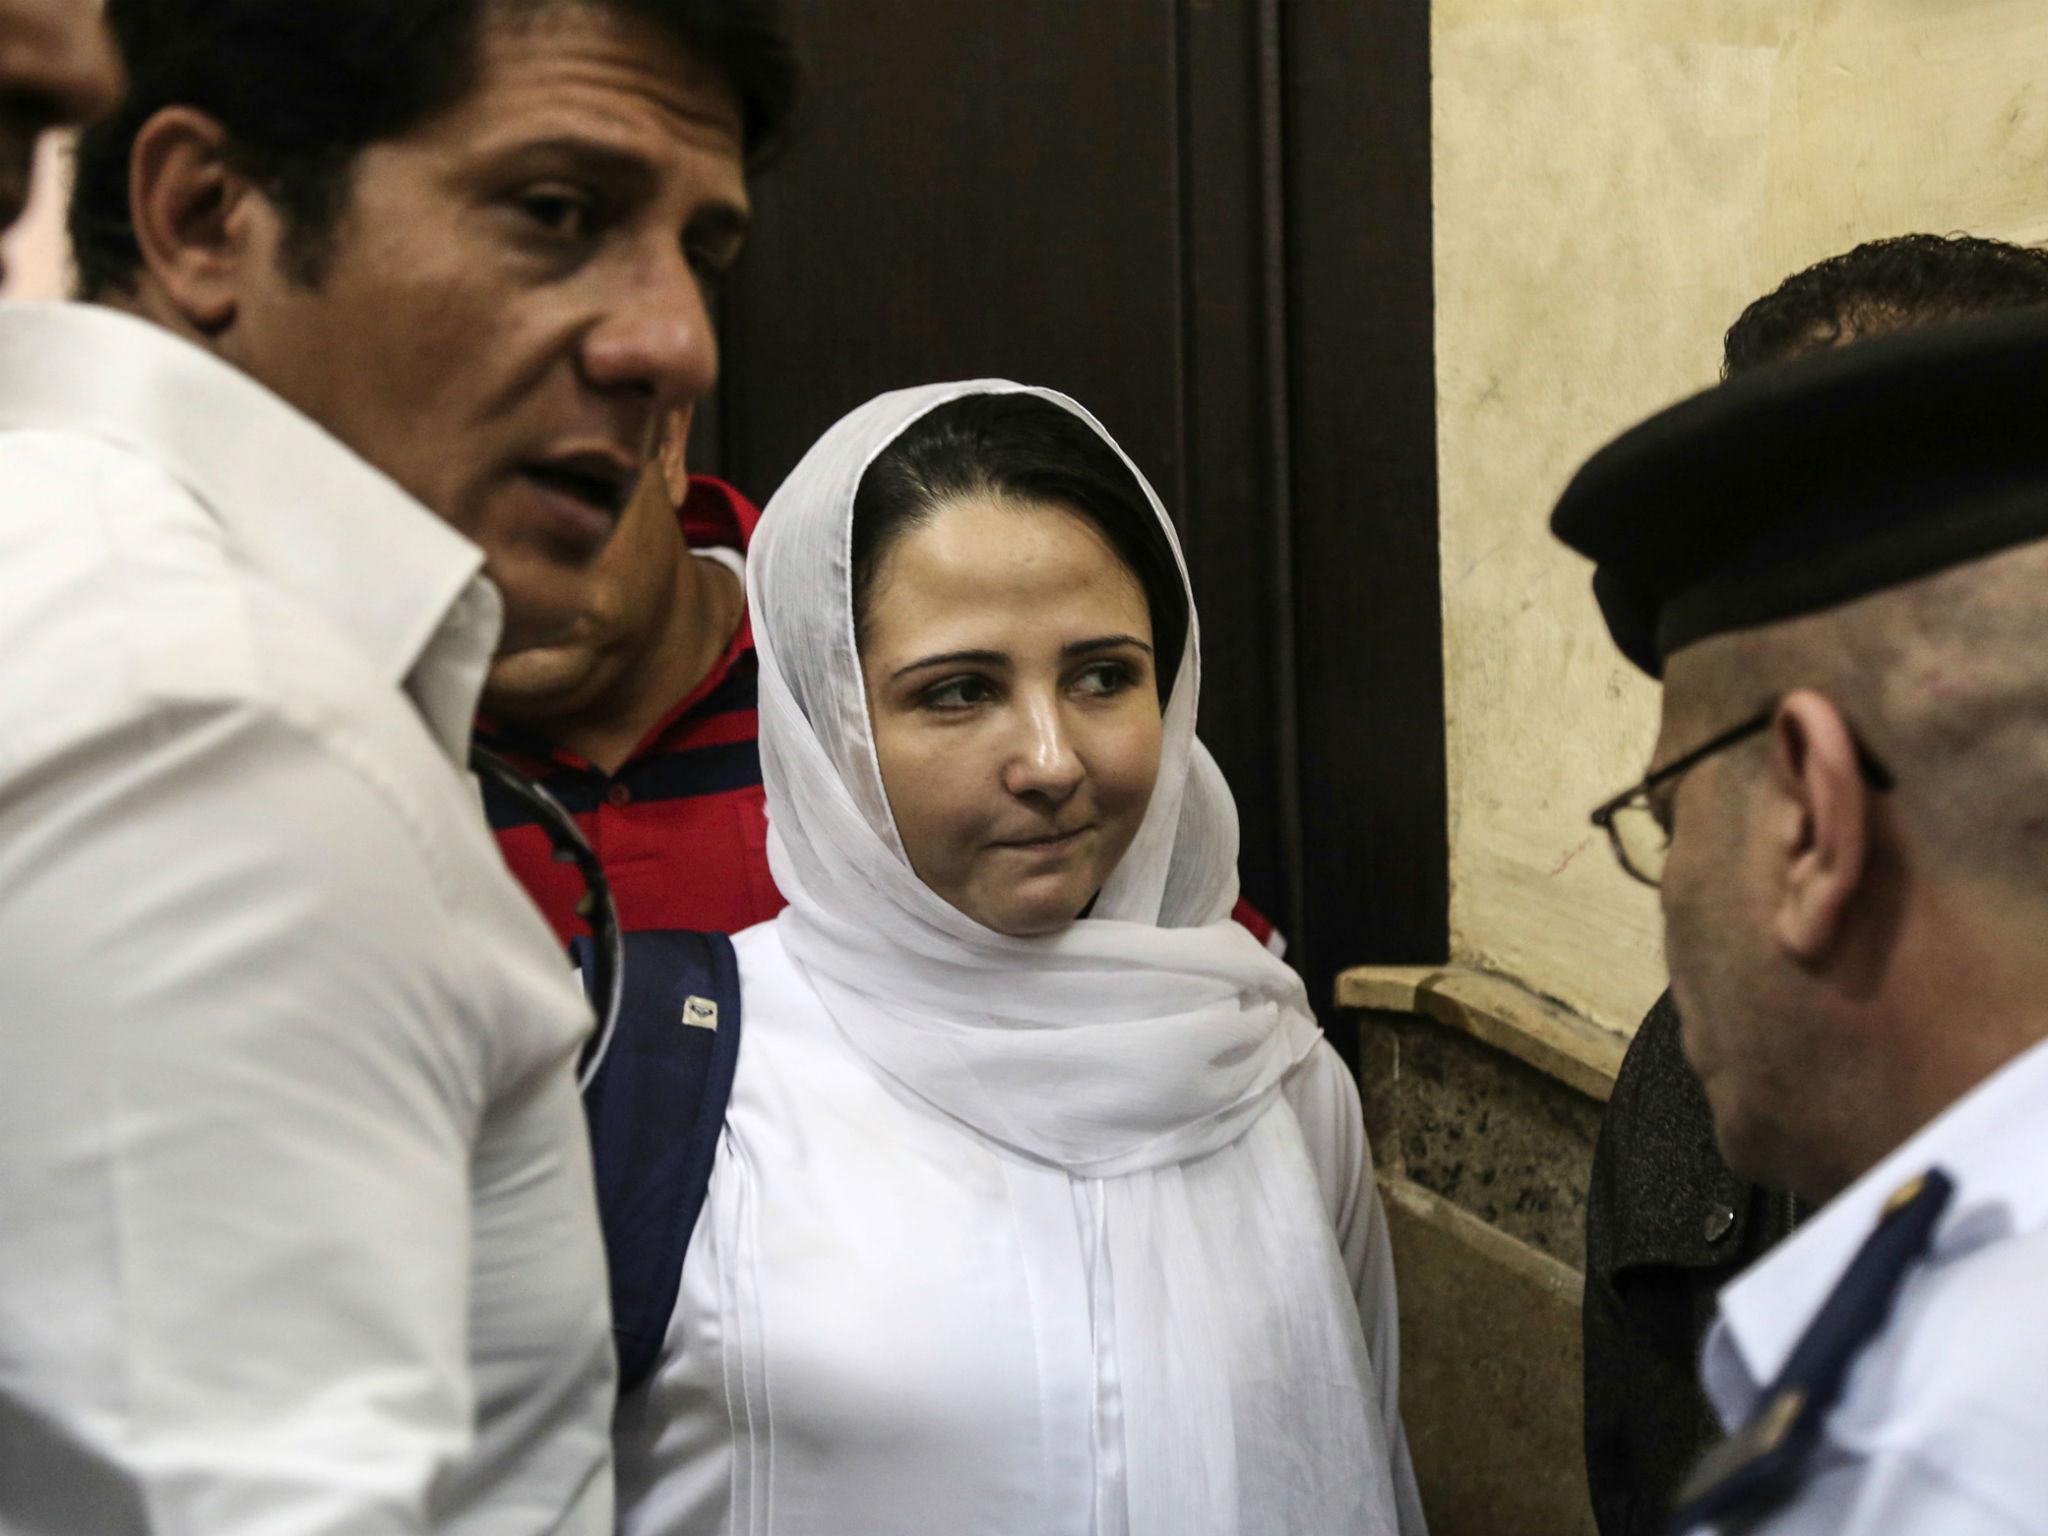 Ms Hijazi and seven others had all charges against them dropped after three years in prison